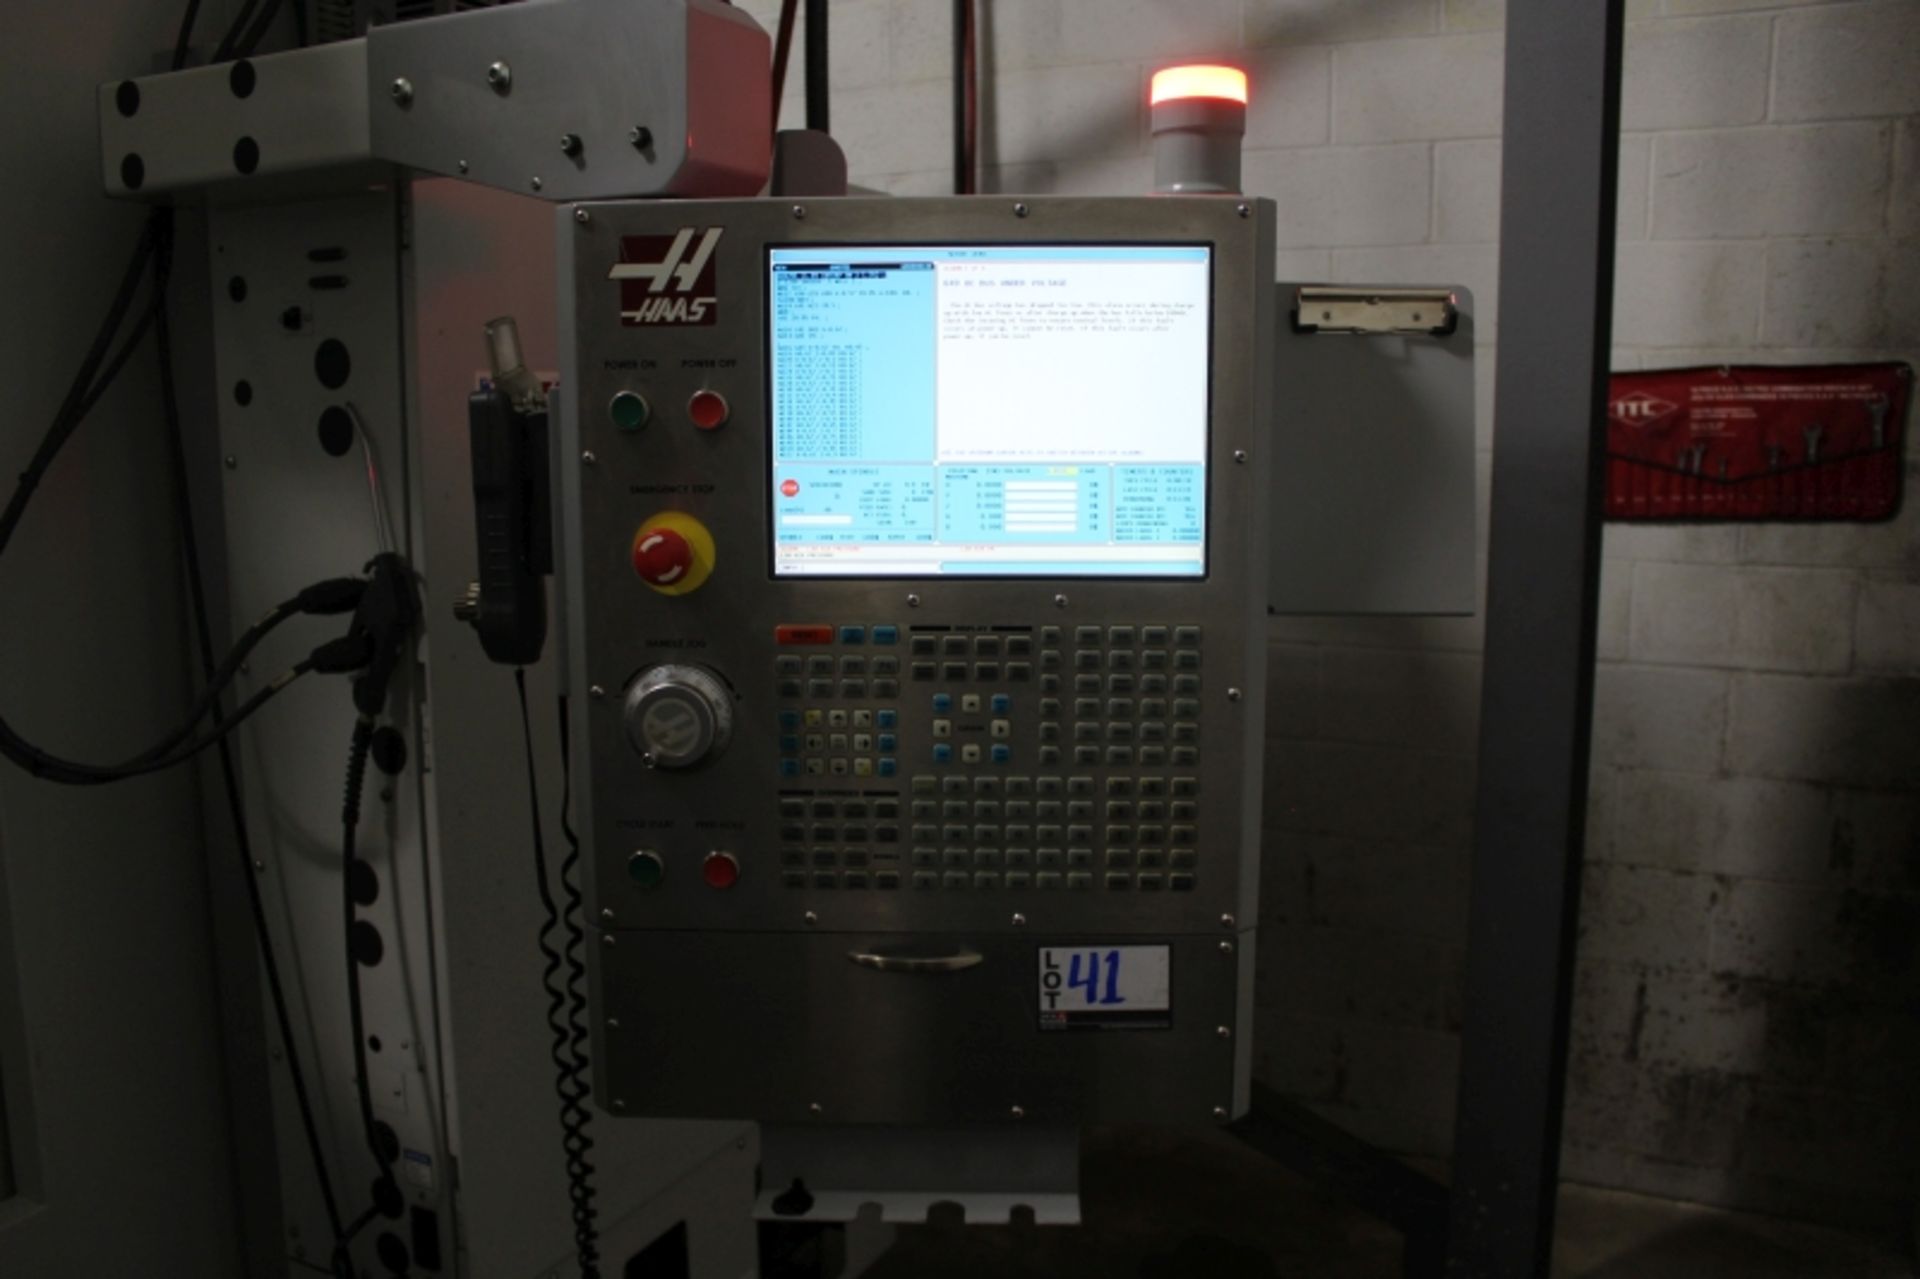 Haas EC-1600-4X, 5-Axis, 64” x 50” x 32” trvls, 7500 RPM, CT50, 30 ATC, CTS, S/N 2052737, New - Image 9 of 13